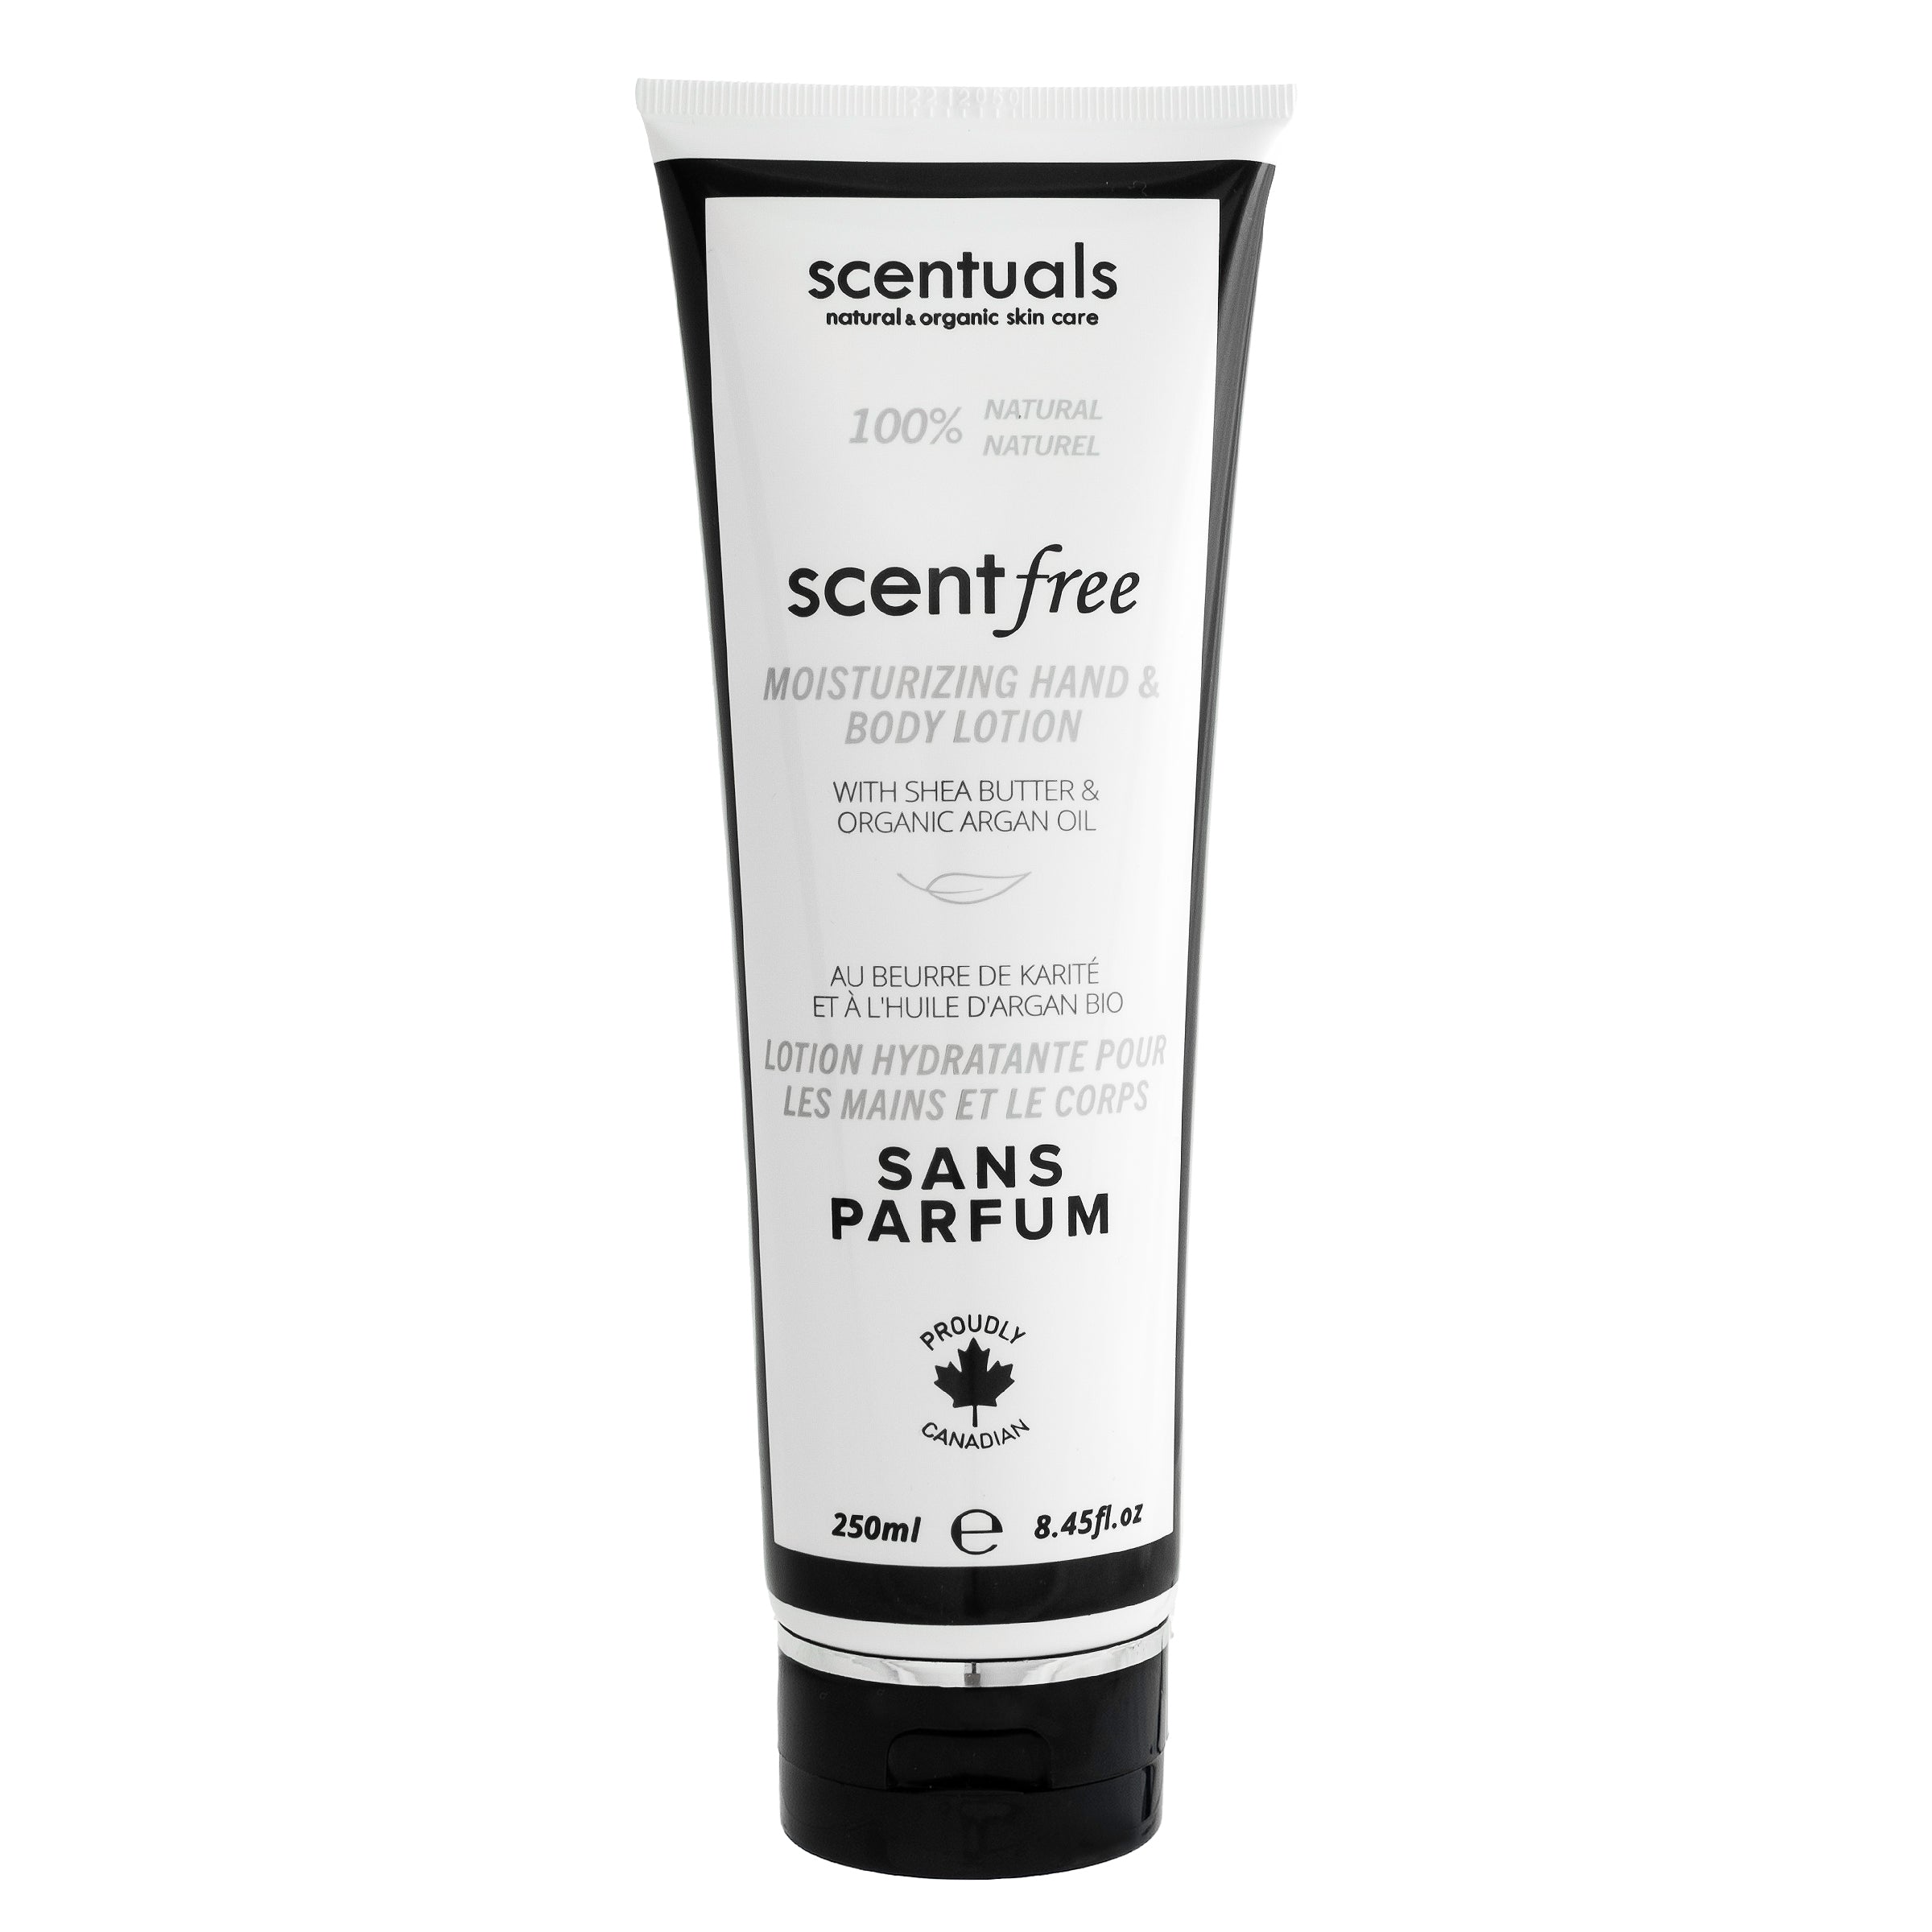 Scentfree Hand and Body Lotion